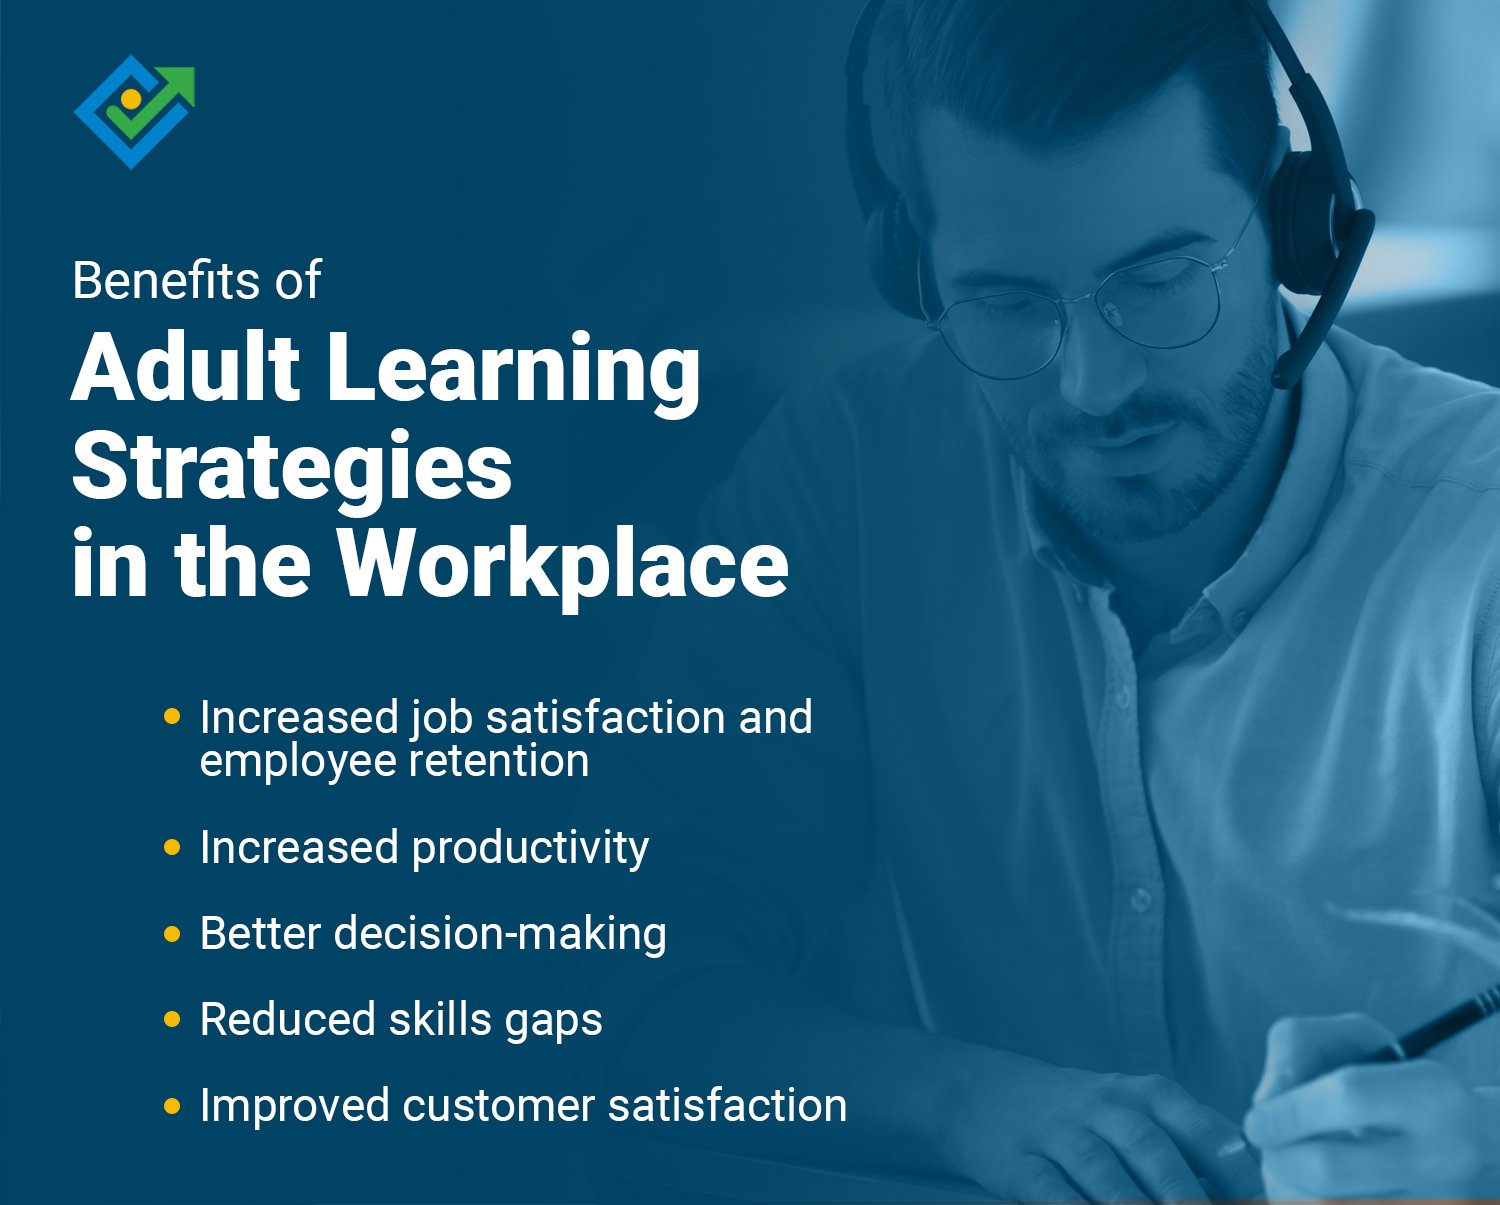 Benefits of adult learning strategies in the workplace